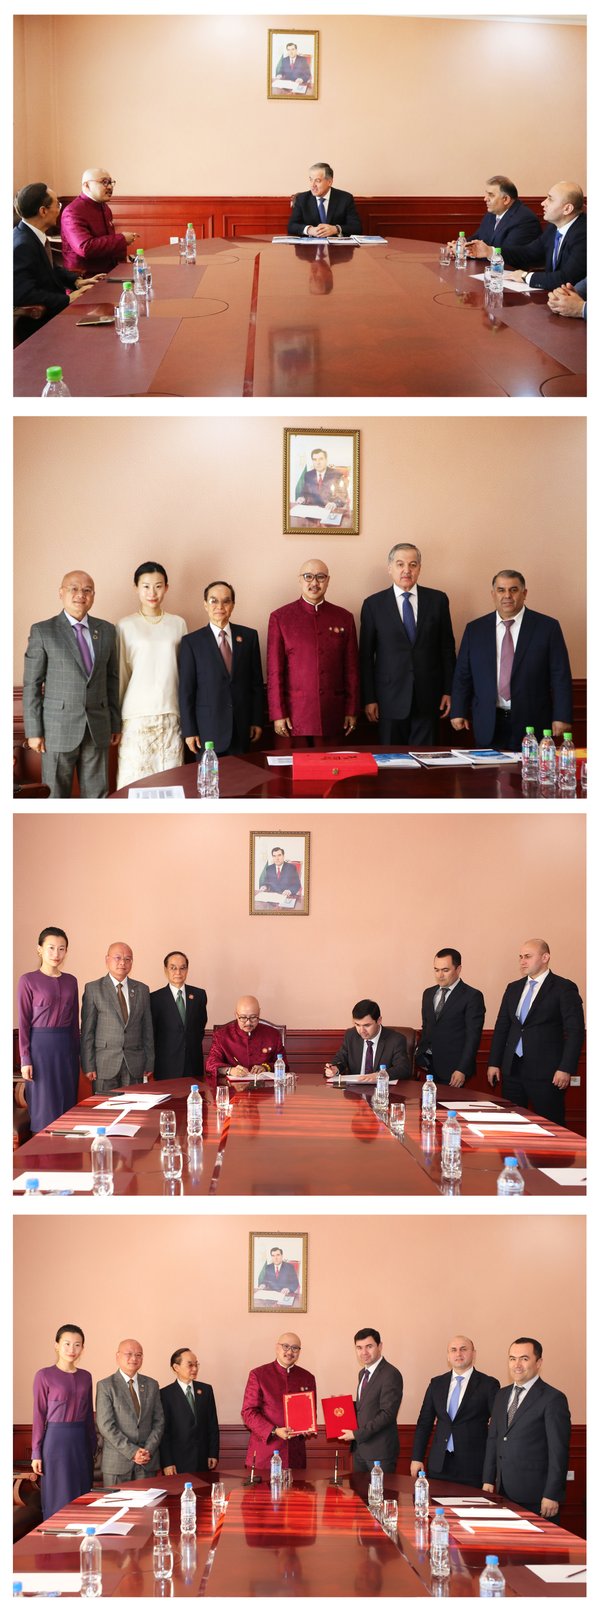 Figure 1: Dato’ Sri Baima Aose meeting with Sirojidin Aslov, Minister of Foreign Affairs of Tajikistan. Figure 2: A group photo of Dato’ Sri Baima Aose and delegation, Sirojidin Aslov, Minister of Foreign Affairs of Tajikistan, and Hasan Asadullozoda the Chair of Orienbank. Figure 3-4: Dato’ Sri Baima Aose signed a mulit-party agreement for partnership of the Conference with the head of Legal Department of Ministry of Foreign Affairs of Tajikistan